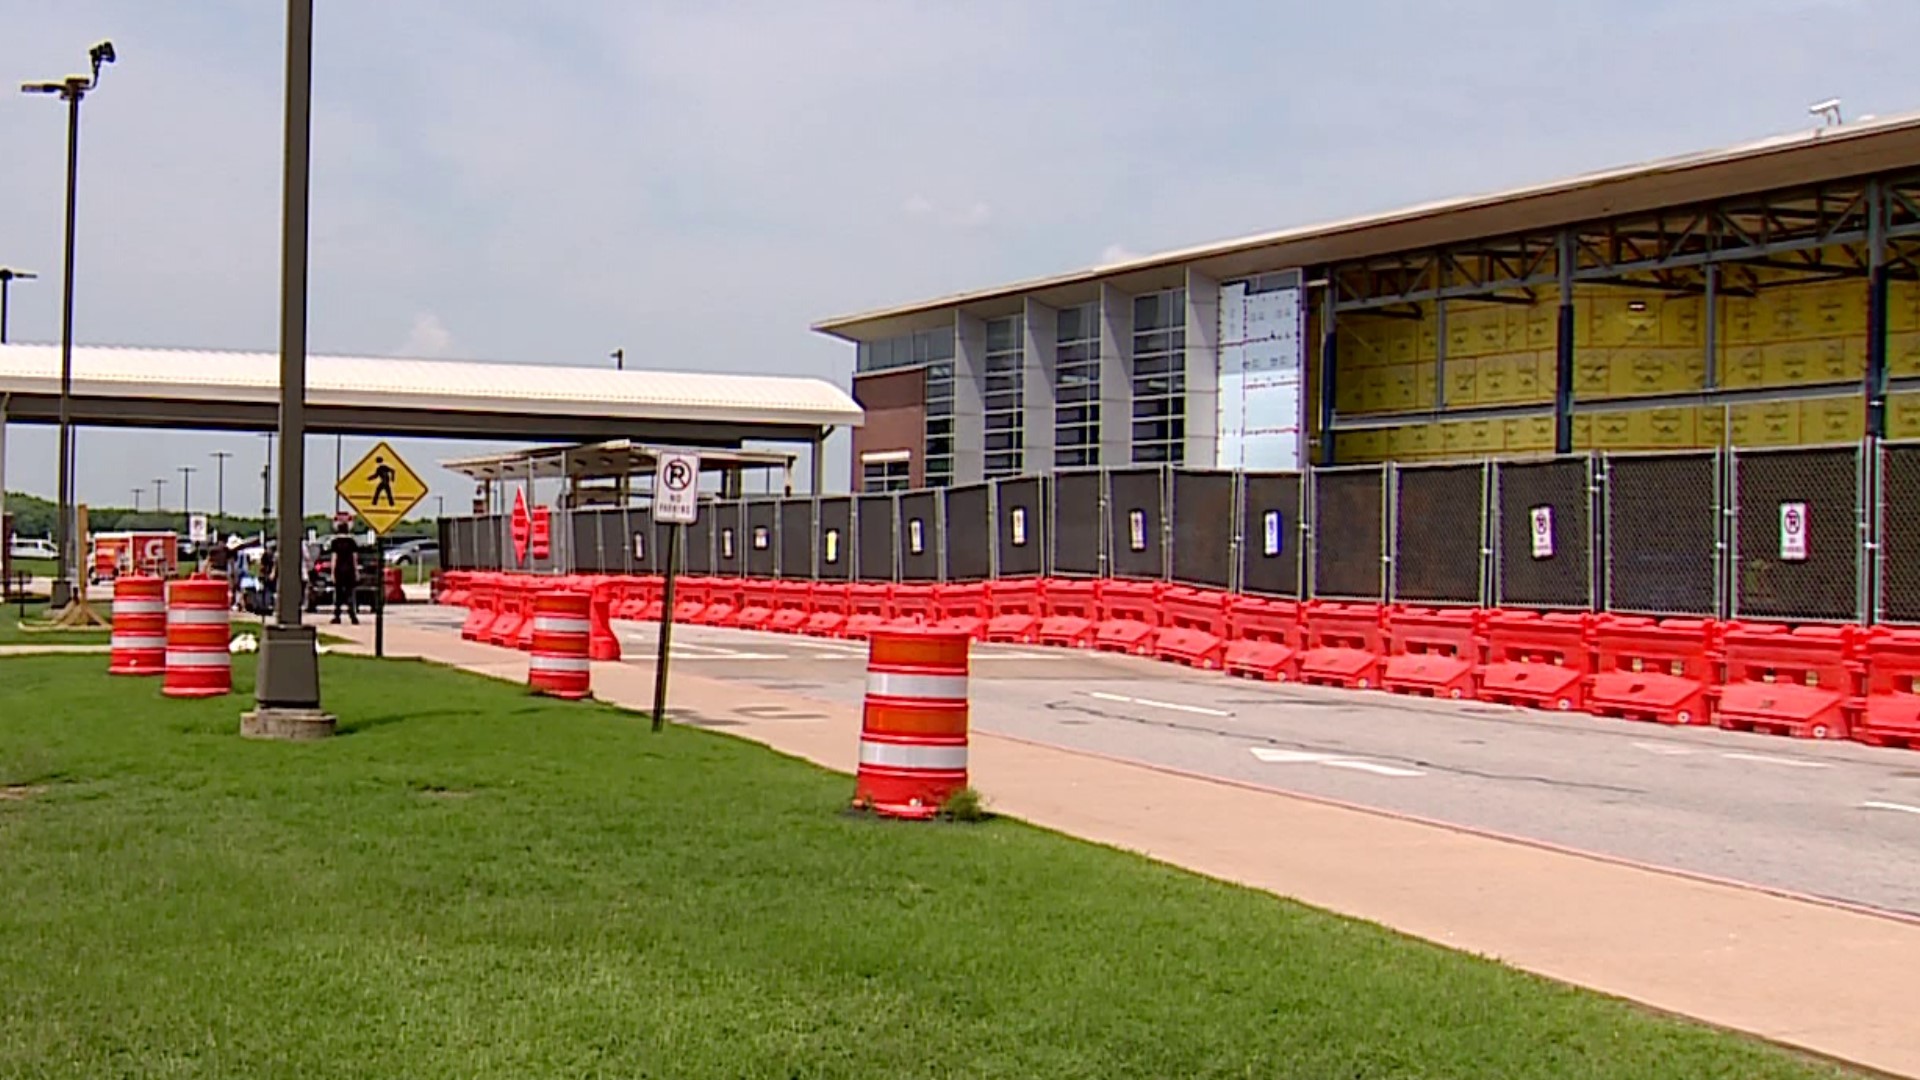 XNA's remodel is set to add escalators and elevators, renovate the baggage area, and put a cover over the pickup and drop-off lanes.